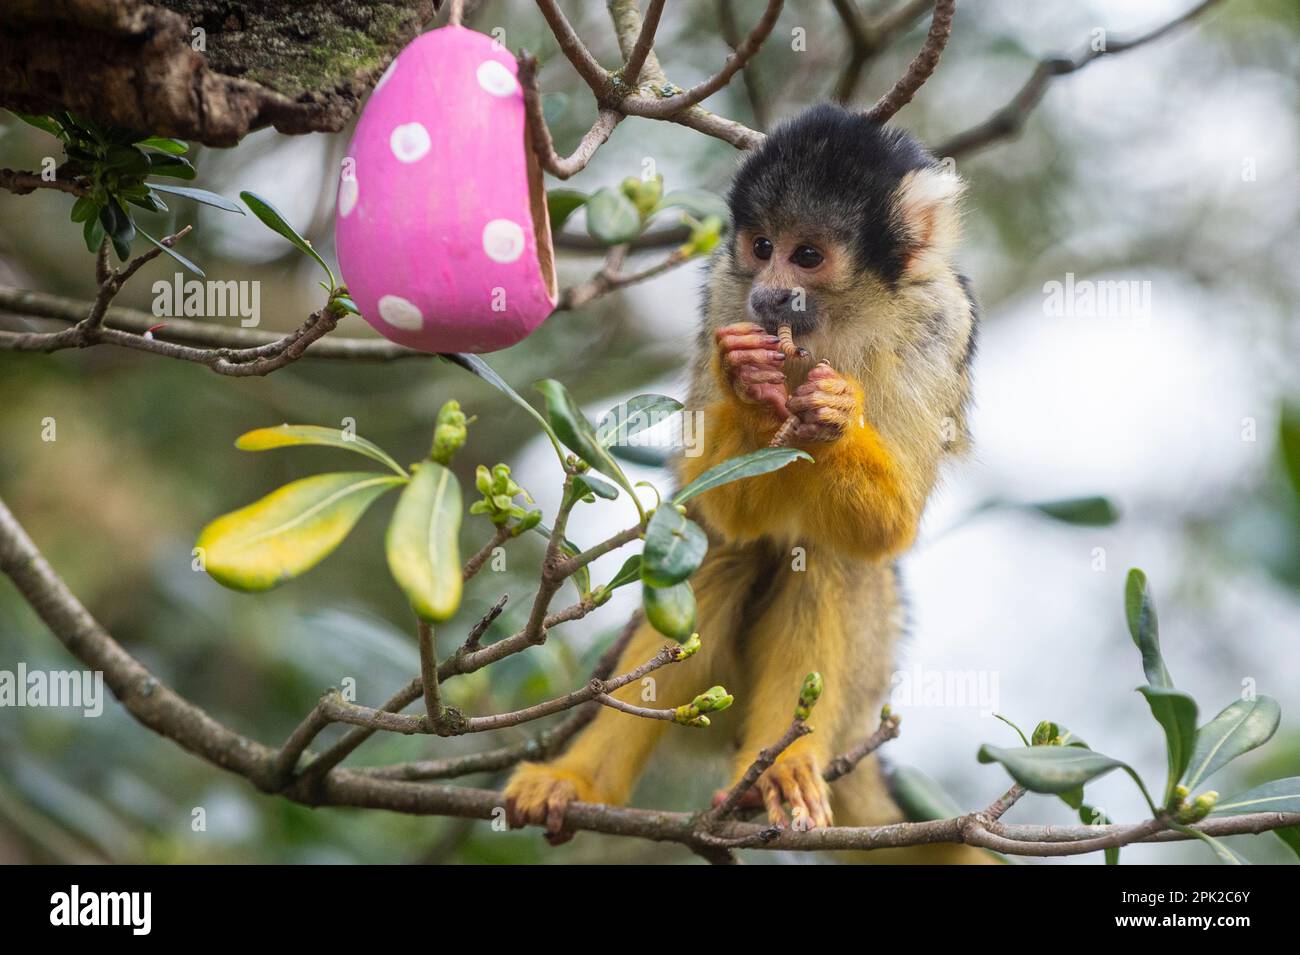 London, UK.  5 April 2023. A Bolivian black-capped squirrel monkey forages amongst colourful eggs hanging in their treetop home, stuffed with their favourite steamed sweet potato, during a photocall at ZSL London Zoo ahead of the conservation zoo’s Zoo-normous Egg Hunt over the Easter Holidays.  Running to 16 April, children are invited to join an egg hunt following educational animal-themed clues and un-scrambling riddles in order to crack the code and find the hidden Golden Egg.  Credit: Stephen Chung / Alamy Live News Stock Photo